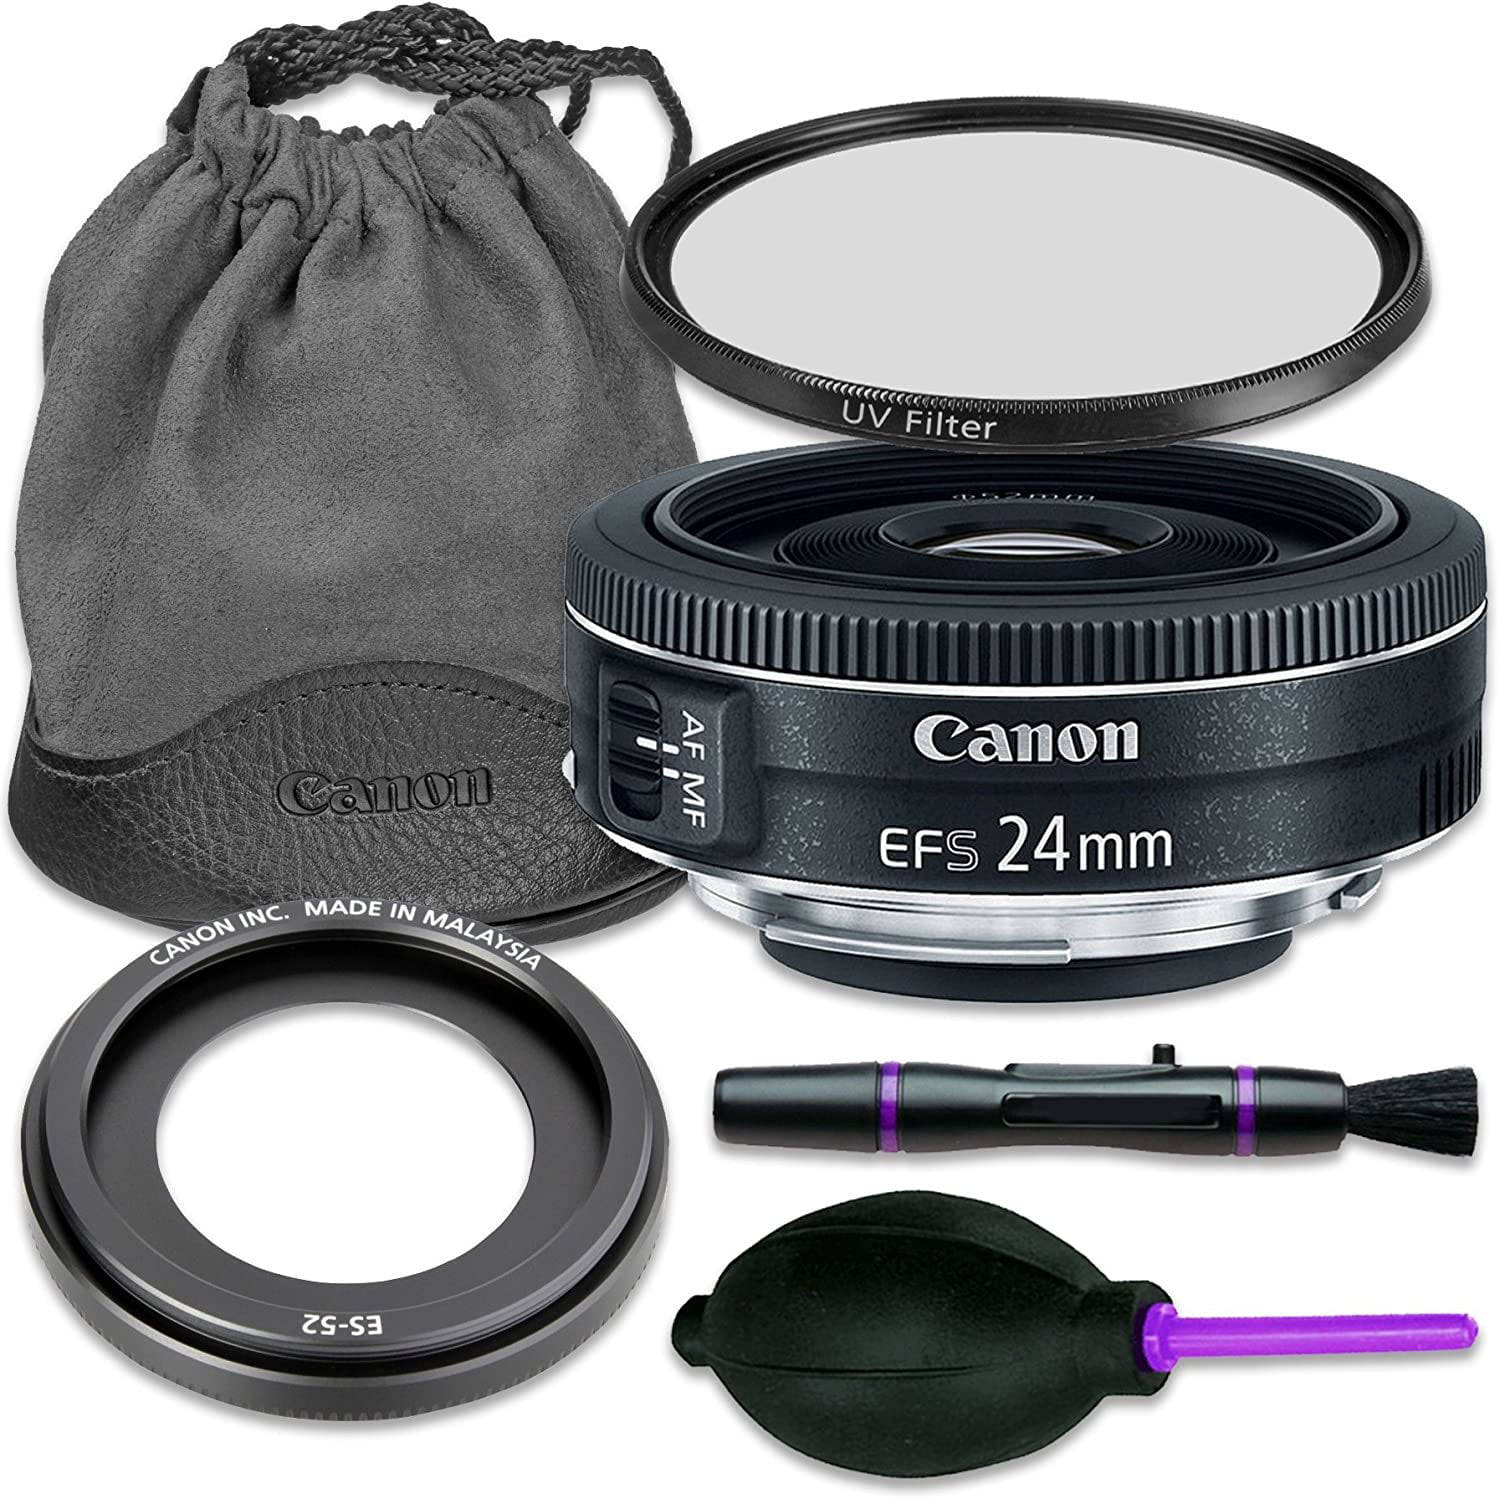 Canon EF-S 24mm f/2.8 STM Lens with Accessory Bundle